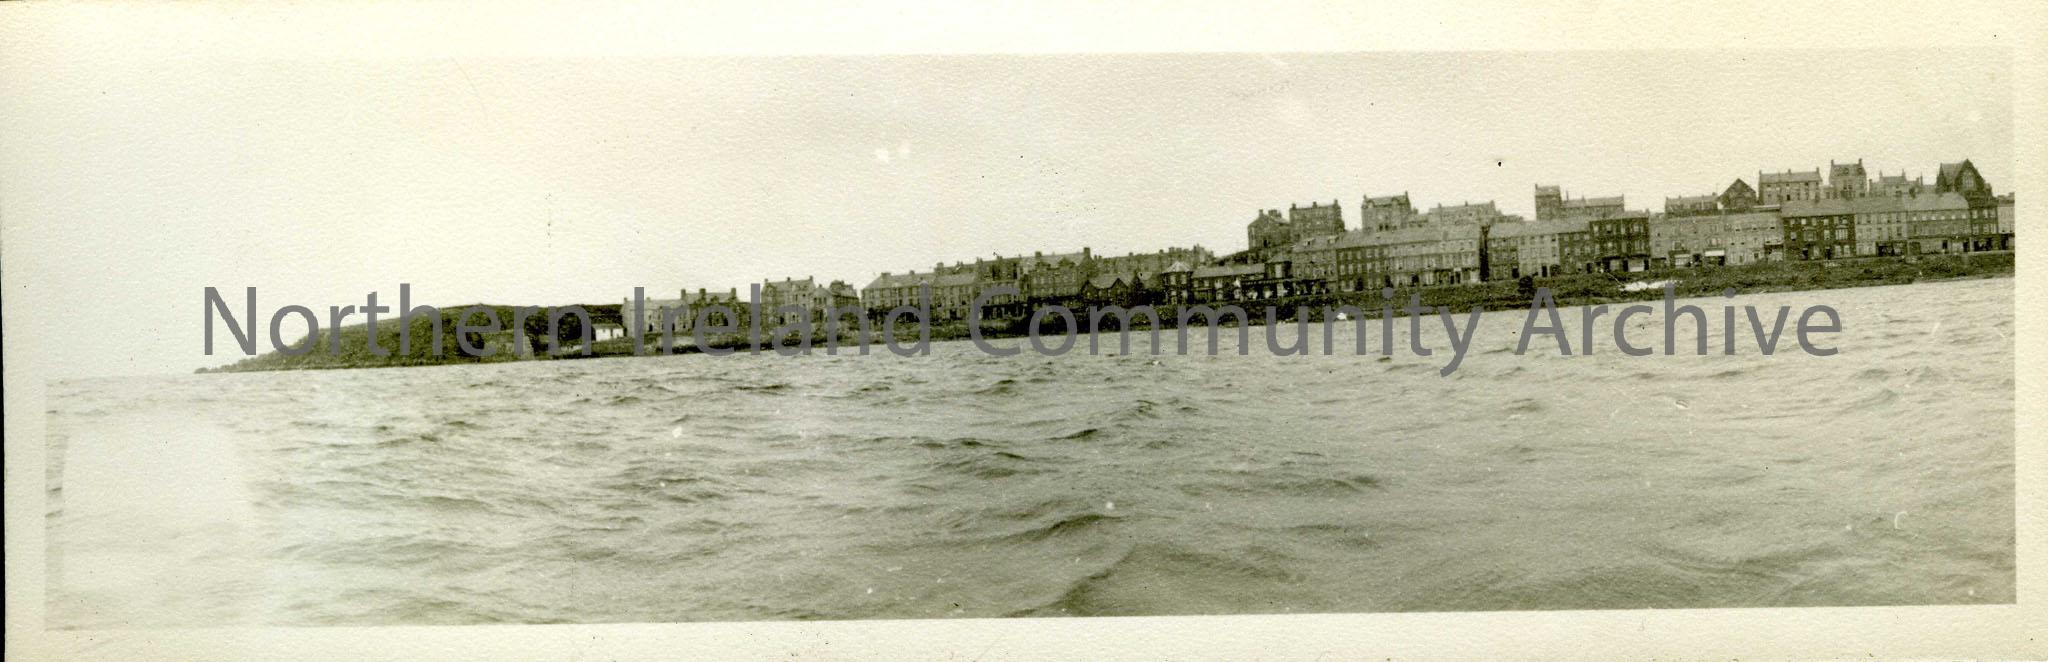 Black and white photograph of Portstewart promenade. Taken from a boat on the sea. The Harbour is visible, with Harbour Hill behind.